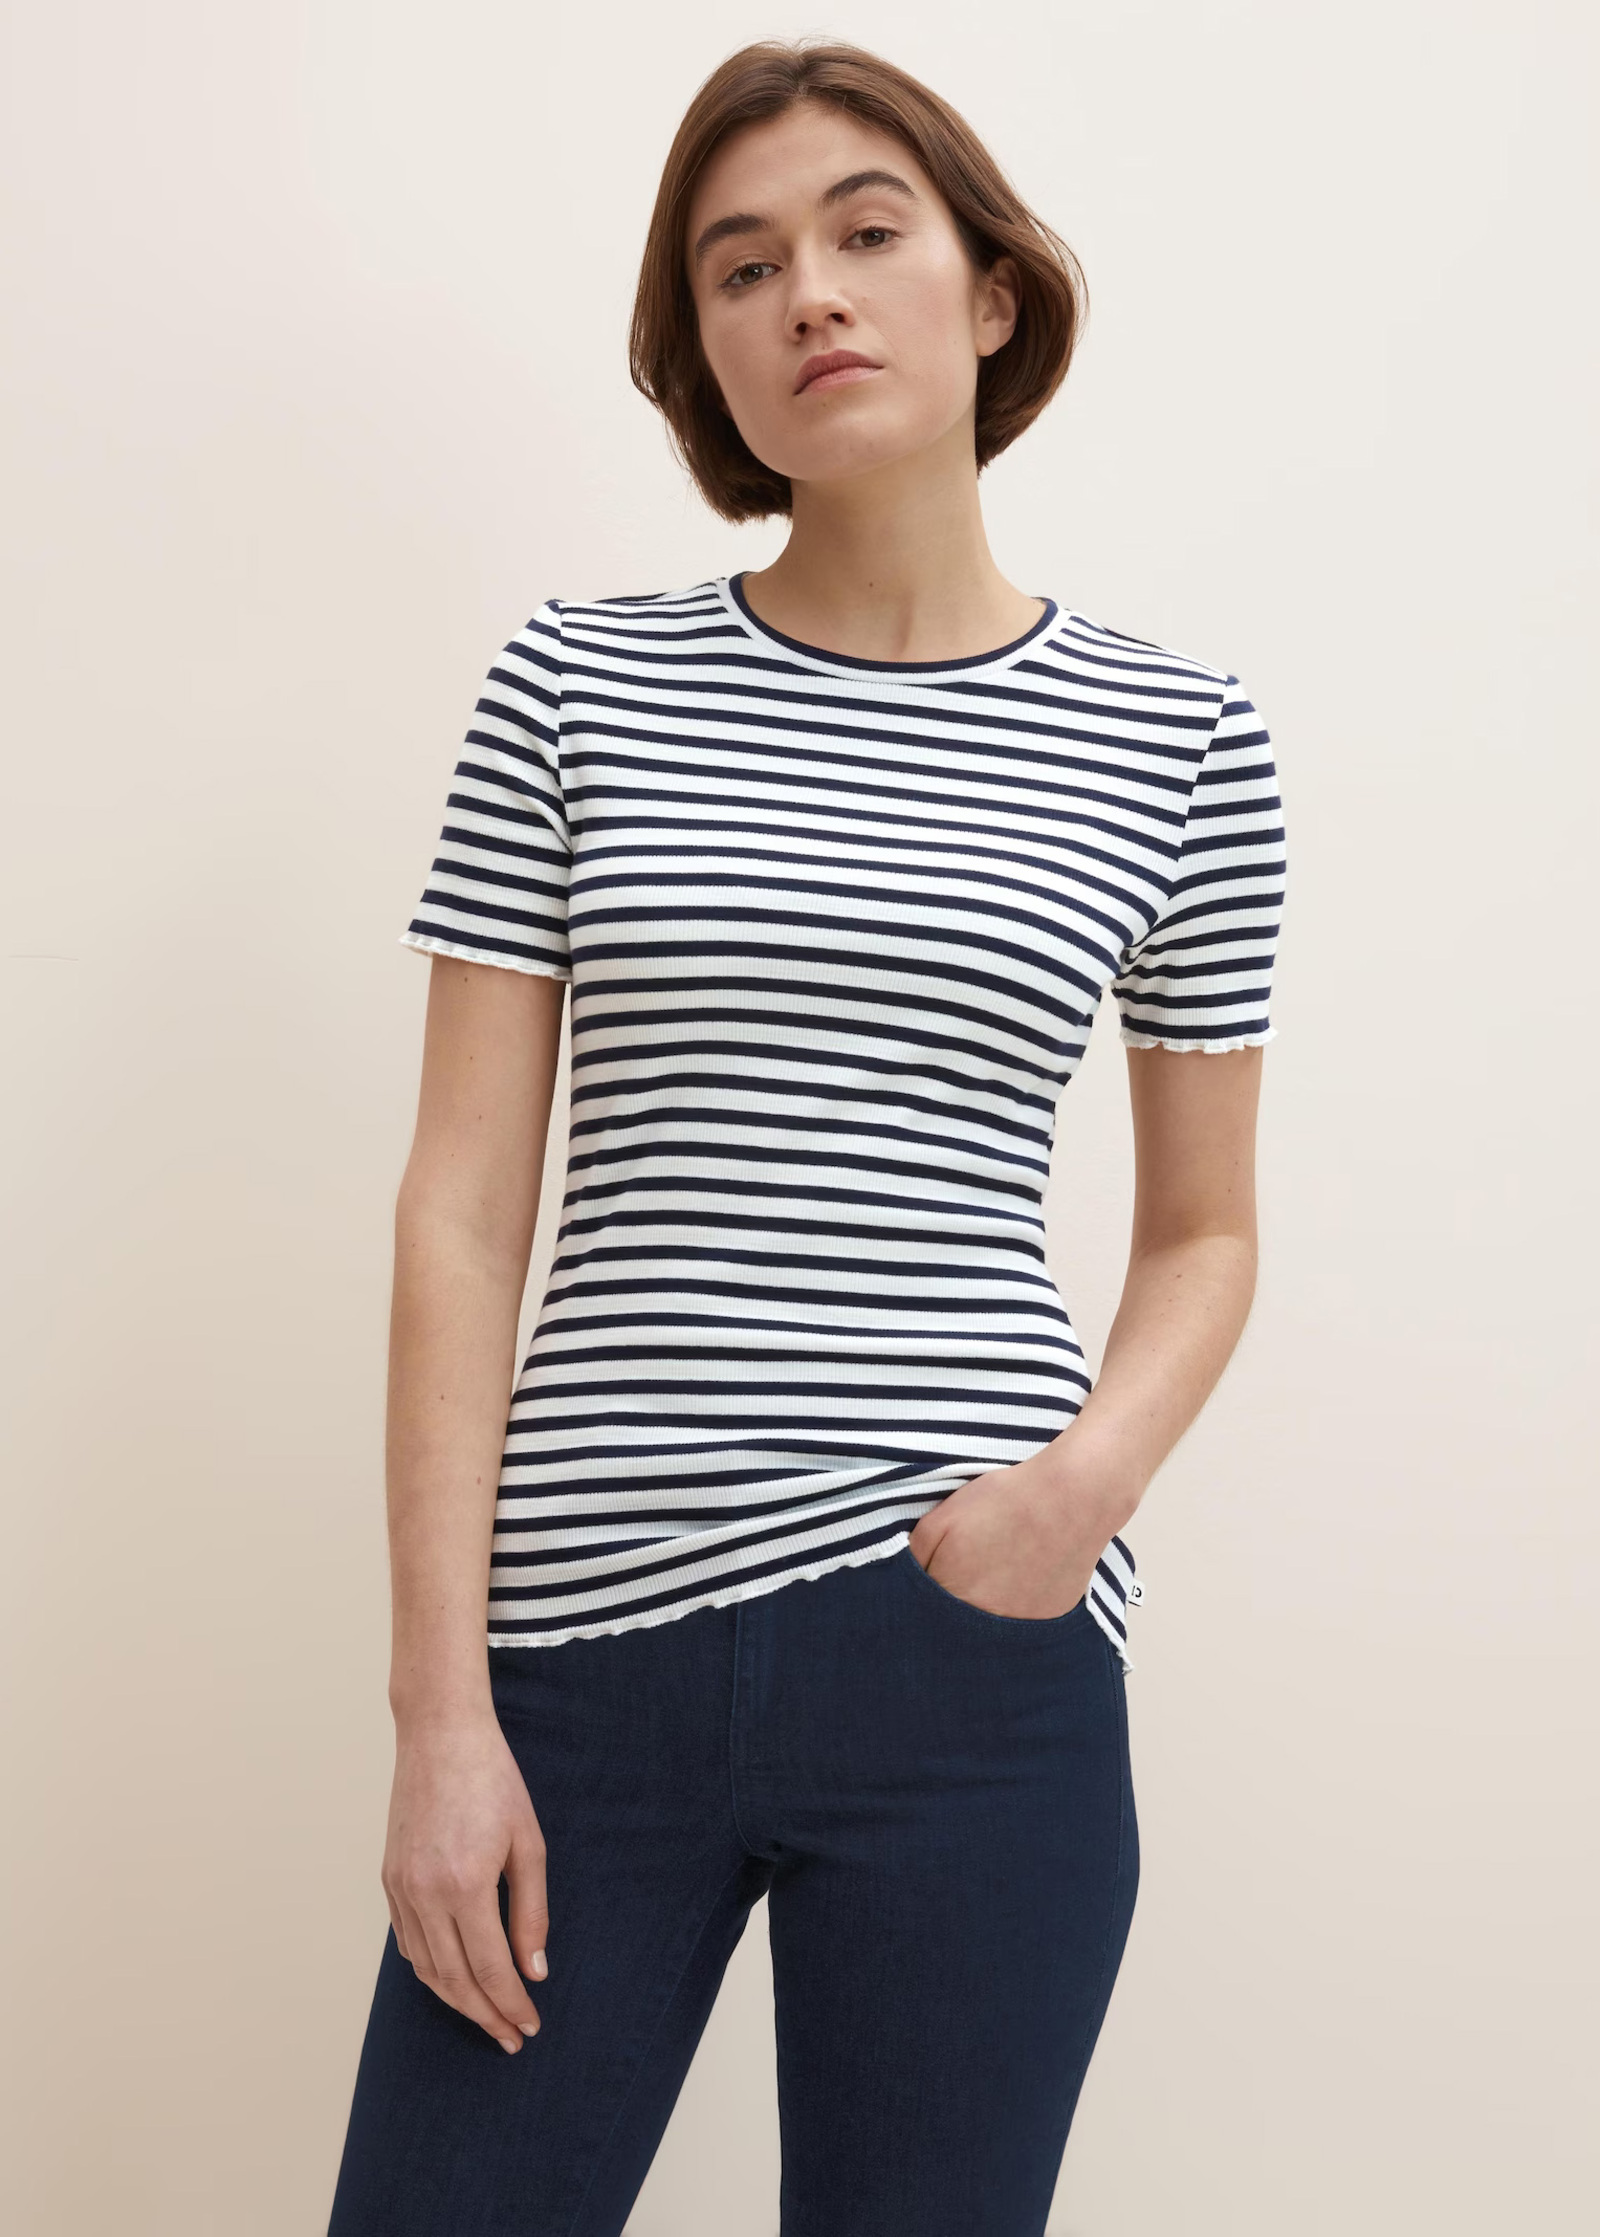 Tom Tailor® Slim fit t-shirt with Stripes - Navy White Stripe Size M